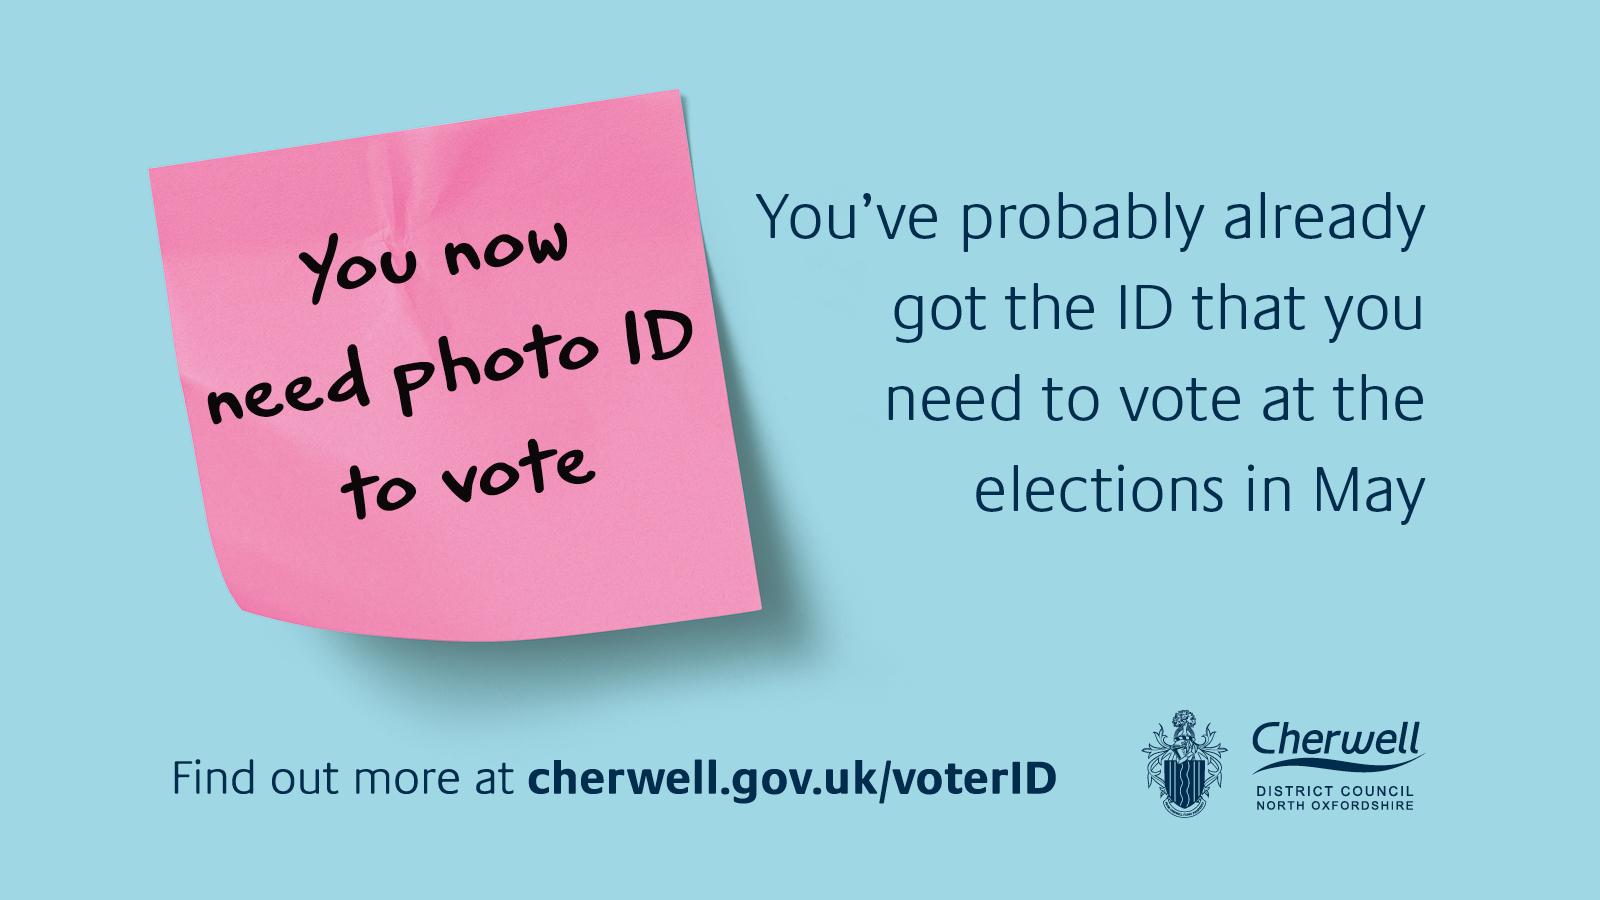 A pink post it note reads you need photo ID to vote